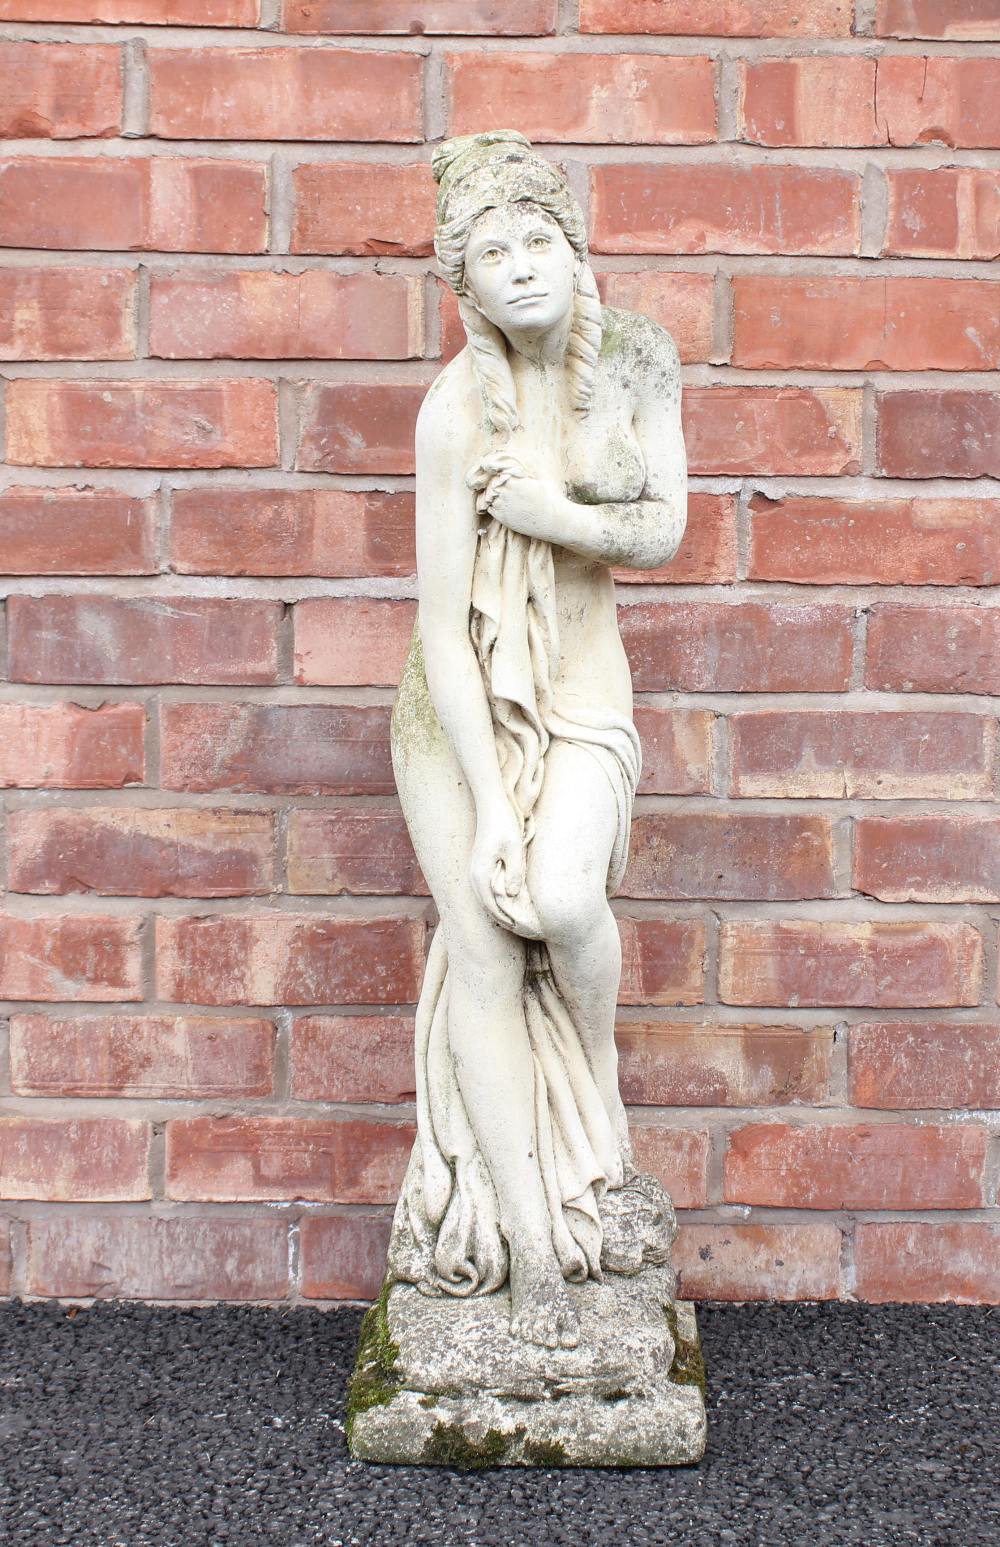 A reconstituted stone garden statue, modelled as a classical scantily clad female upon an integrated